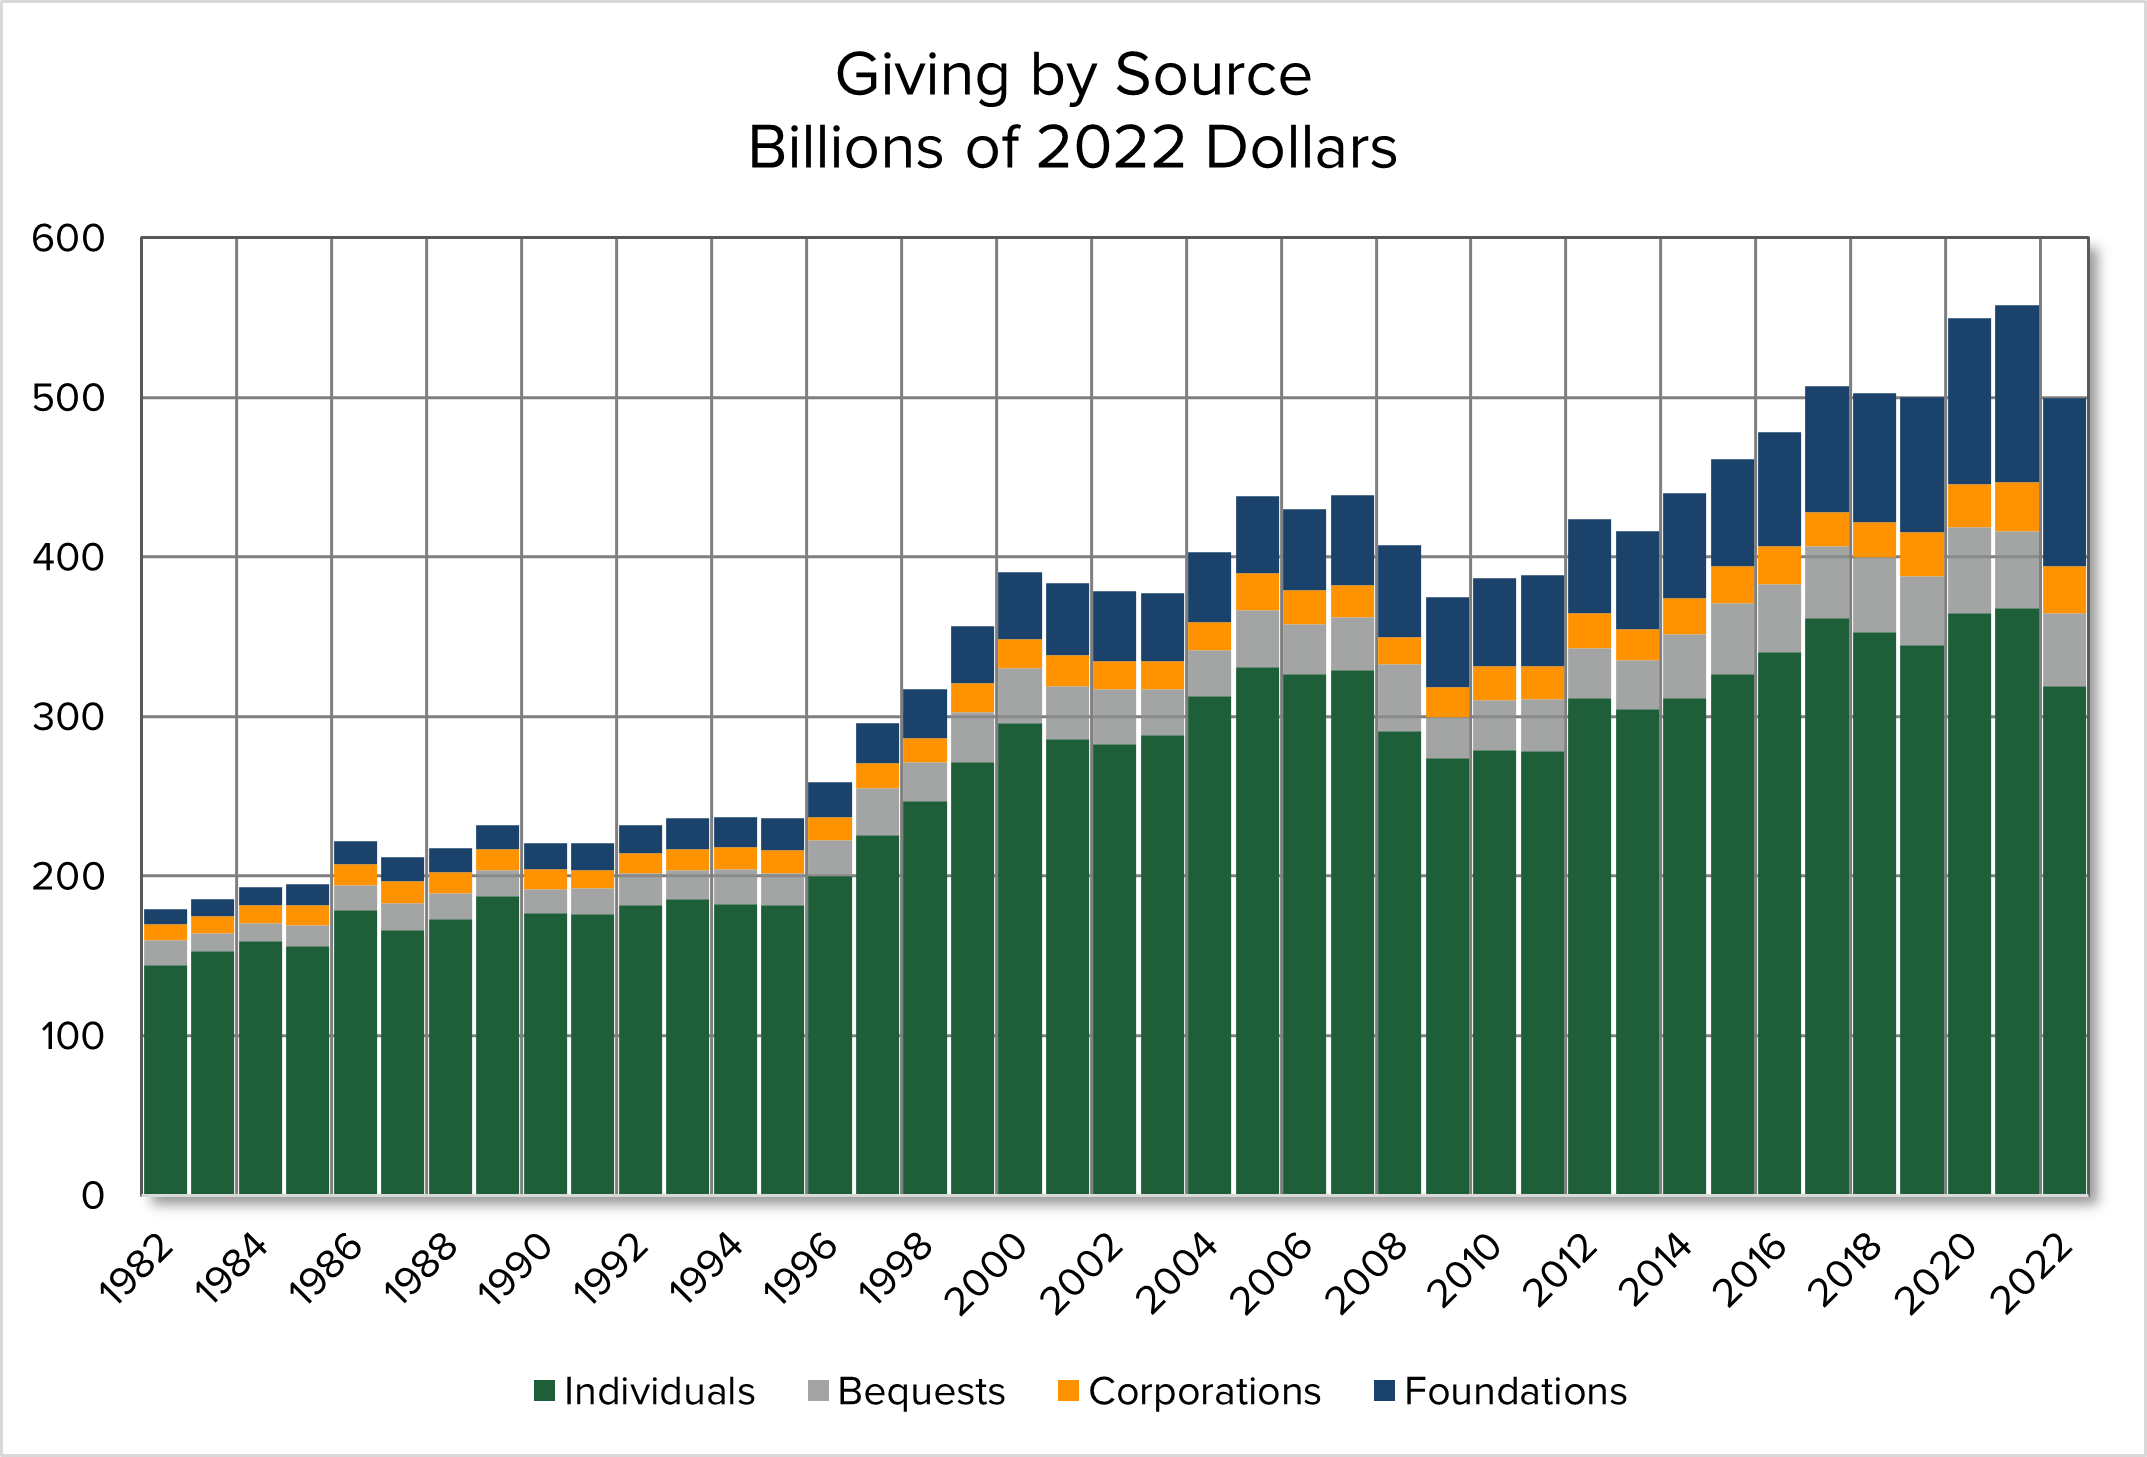 Giving by Source in Billions of 2022 Dollars 1982-2022